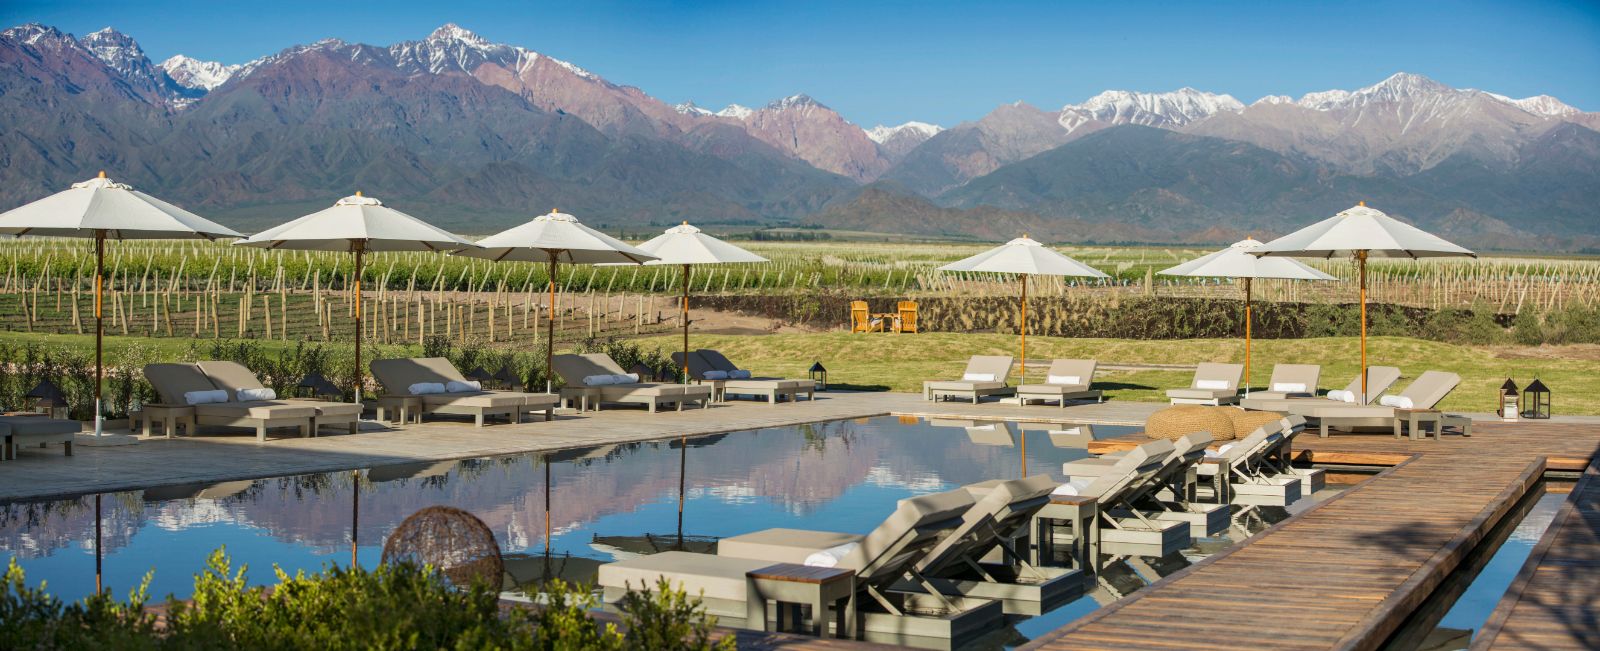 Main pool area at The Vines Resort & Spa in Argentina's Uco Valley